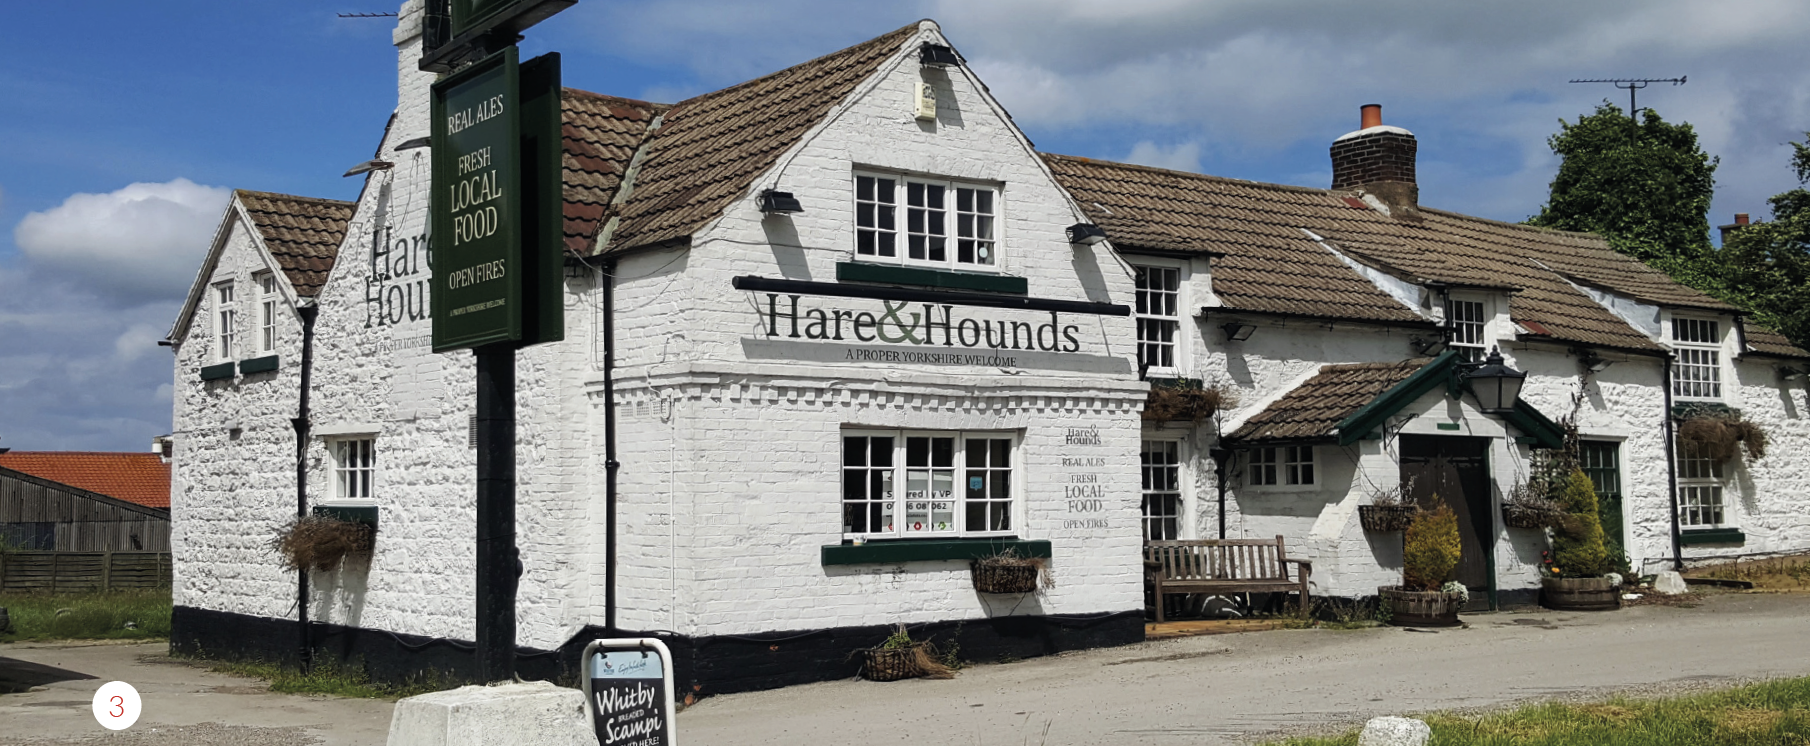 Hare & Hounds, Scarborough